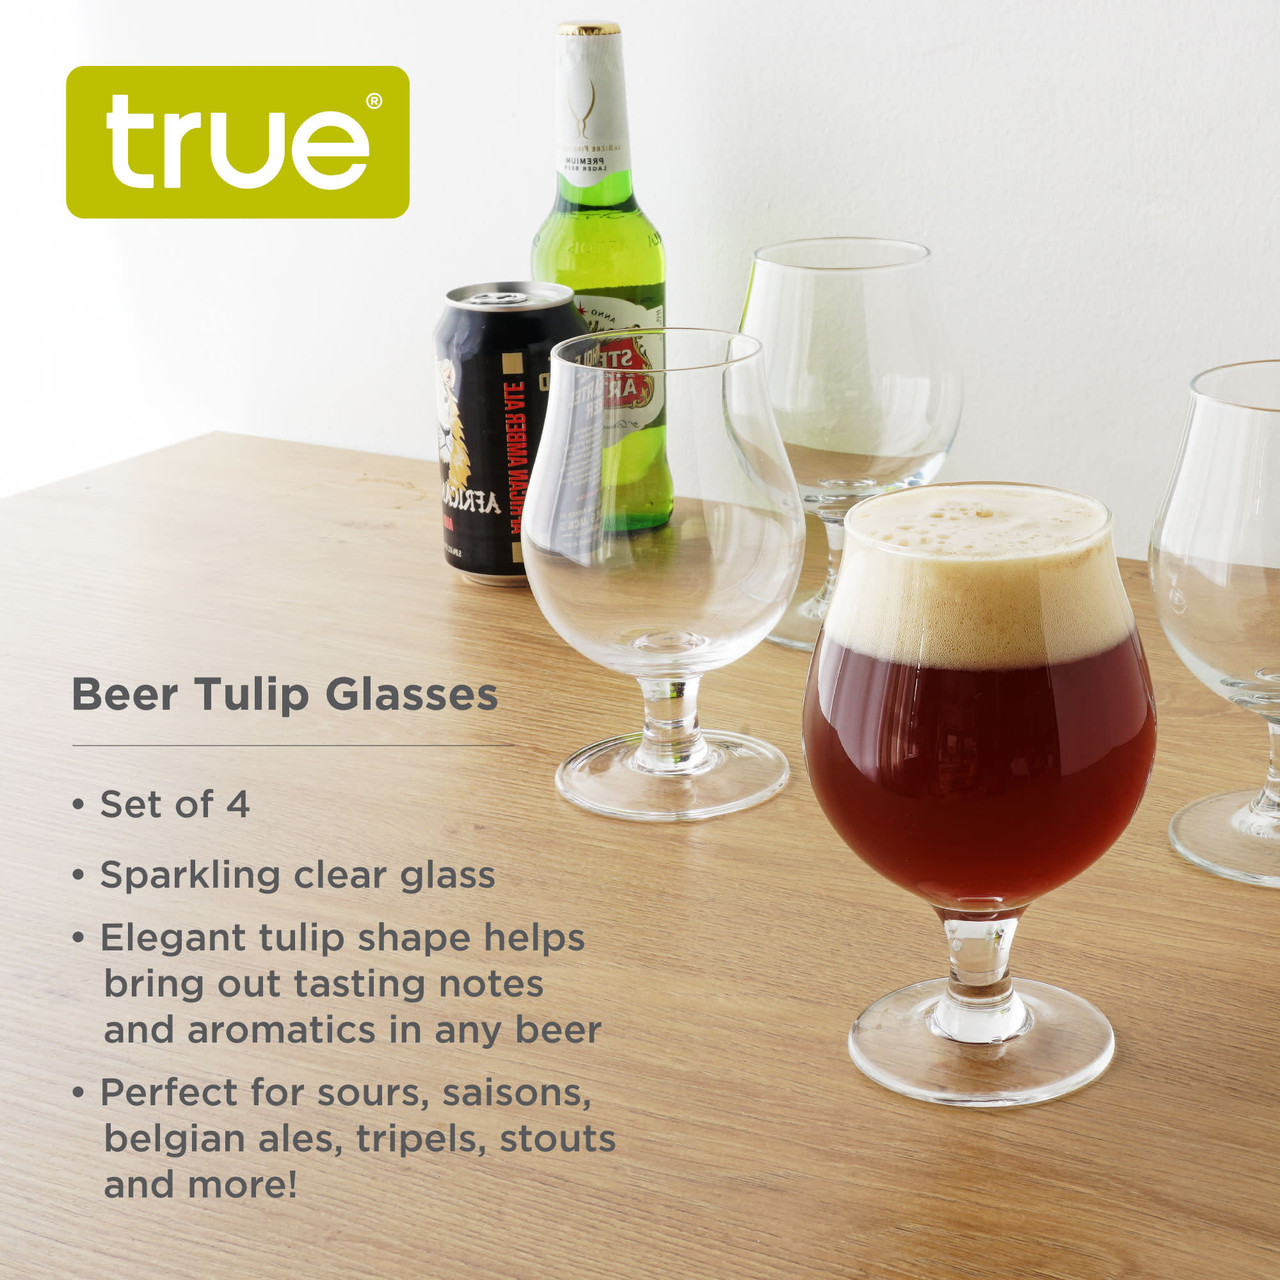 https://cdn11.bigcommerce.com/s-oo0gdojvjo/images/stencil/1280x1280/products/68501/101587/beer-tulip-glasses-by-true-set-of-4-3__11042.1683797258.jpg?c=2&imbypass=on